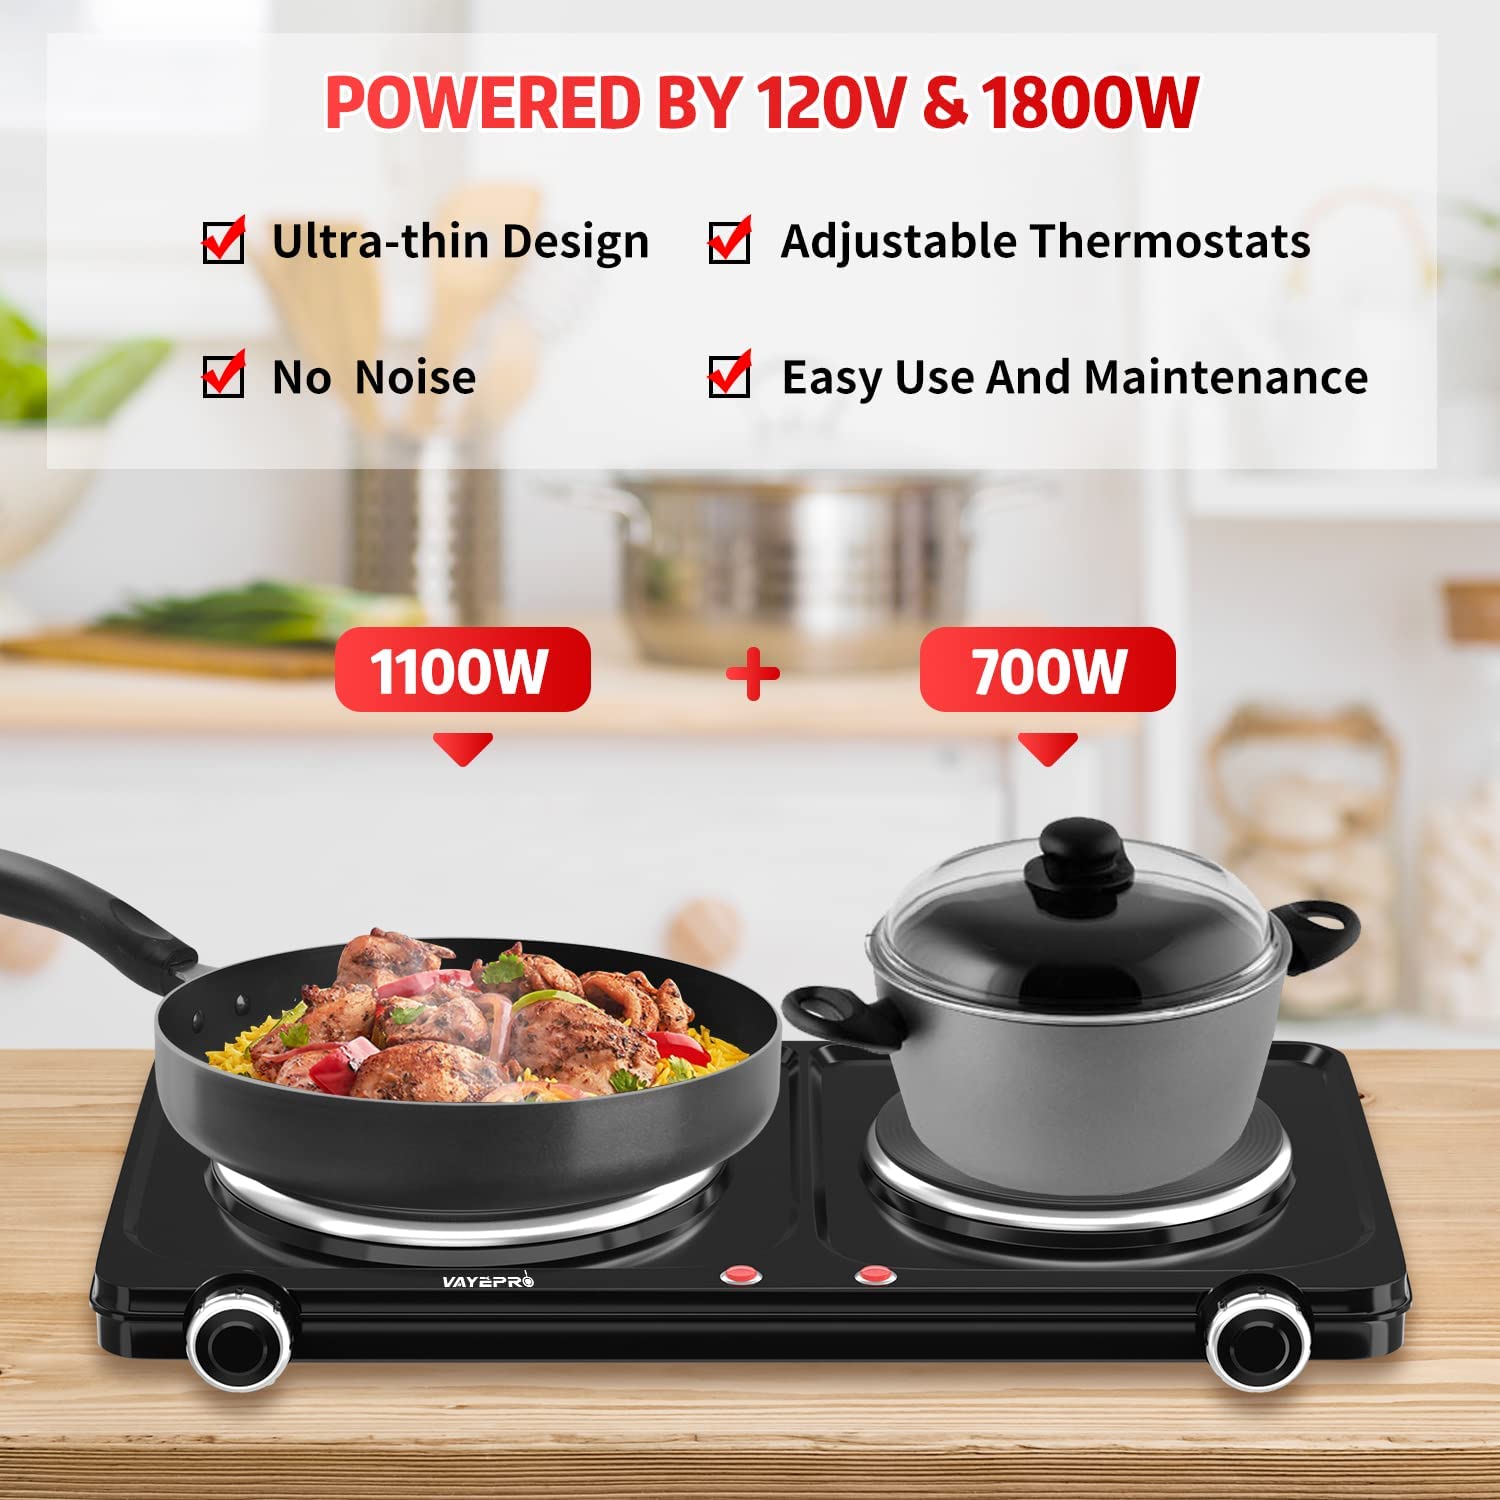 https://bigbigmart.com/wp-content/uploads/2023/07/Hot-Plate-for-Cooking-Vayepro-1800W-Portable-Electric-StoveDouble-Electric-Burner-for-CookingUL-listedCooktop-for-Dorm-Office-Home-Camp-Compatible-with-All-Cookware4.jpg